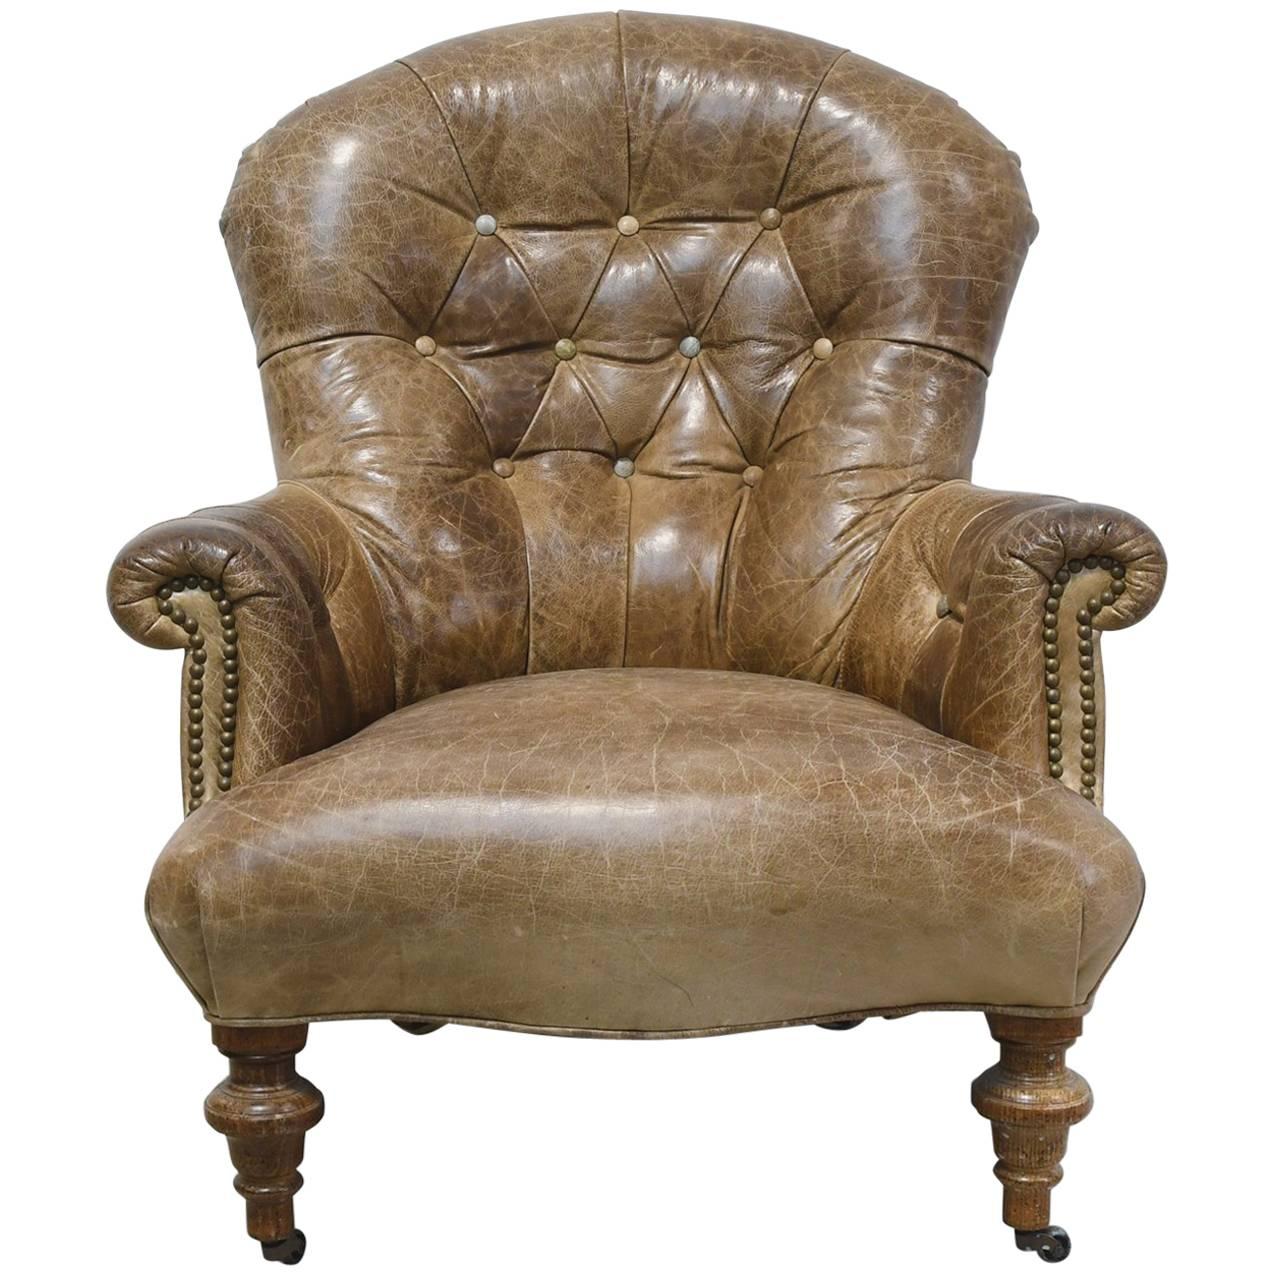 Worn Brown Leather Club Chair with Scrolled Arms, Tufted Back and Turned Feet